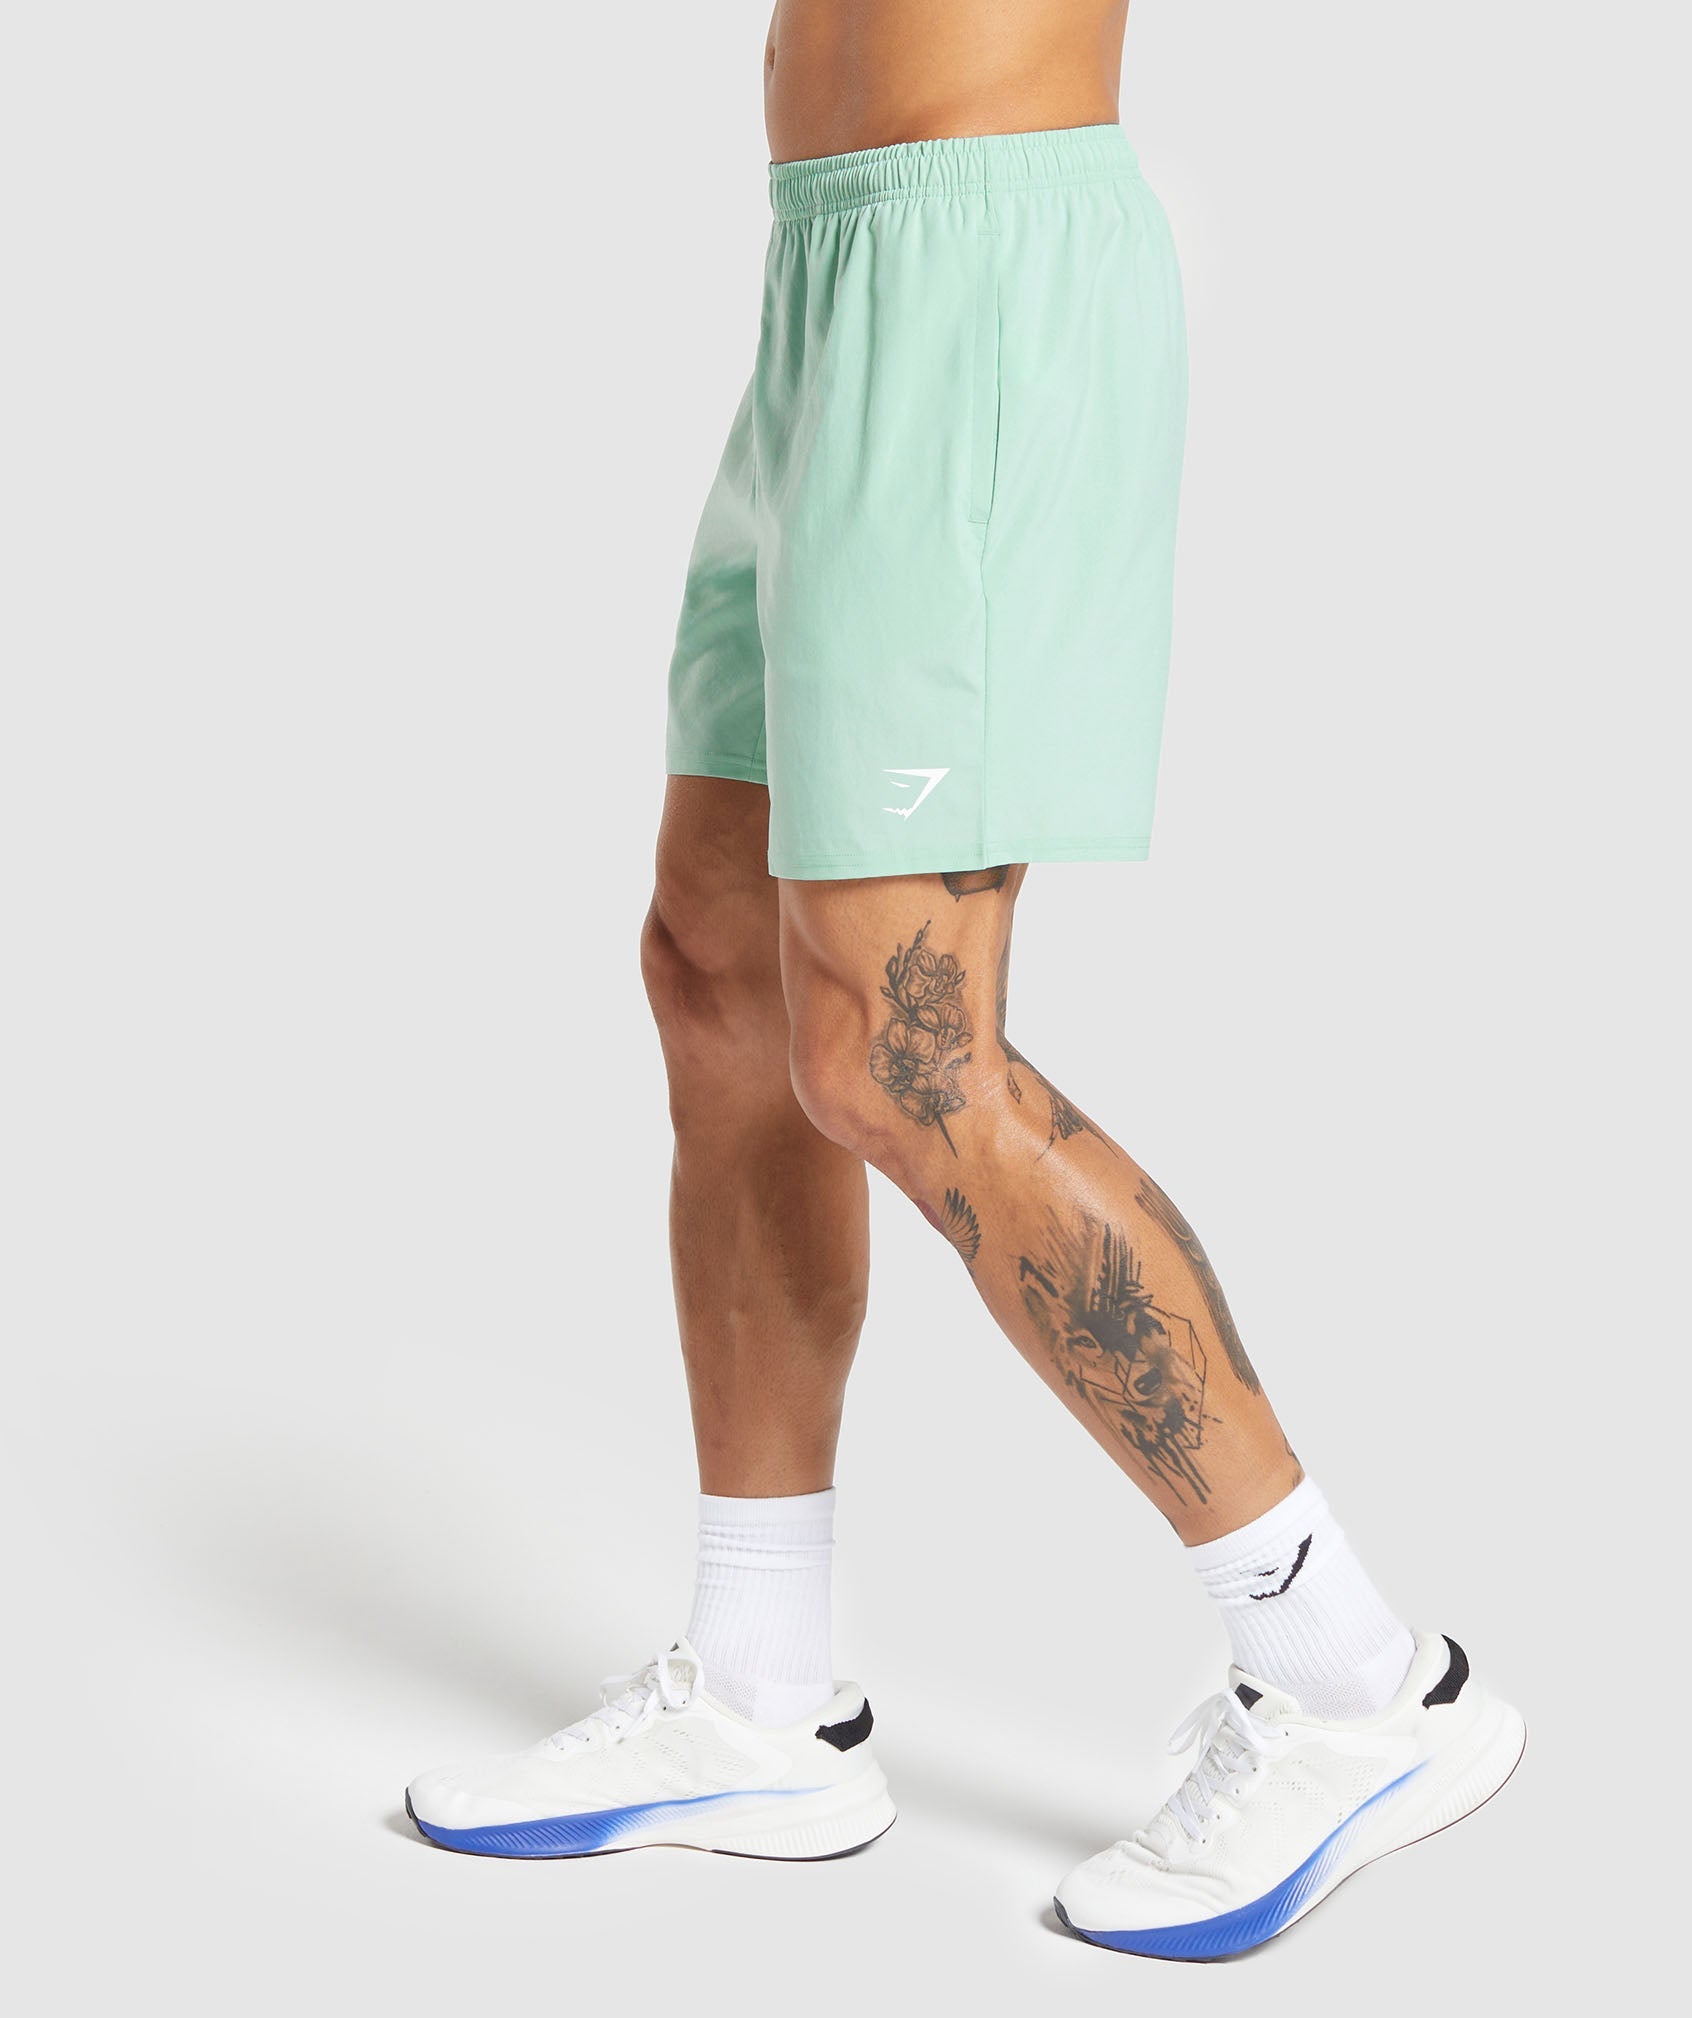 Arrival 7" Shorts in Lido Green - view 3